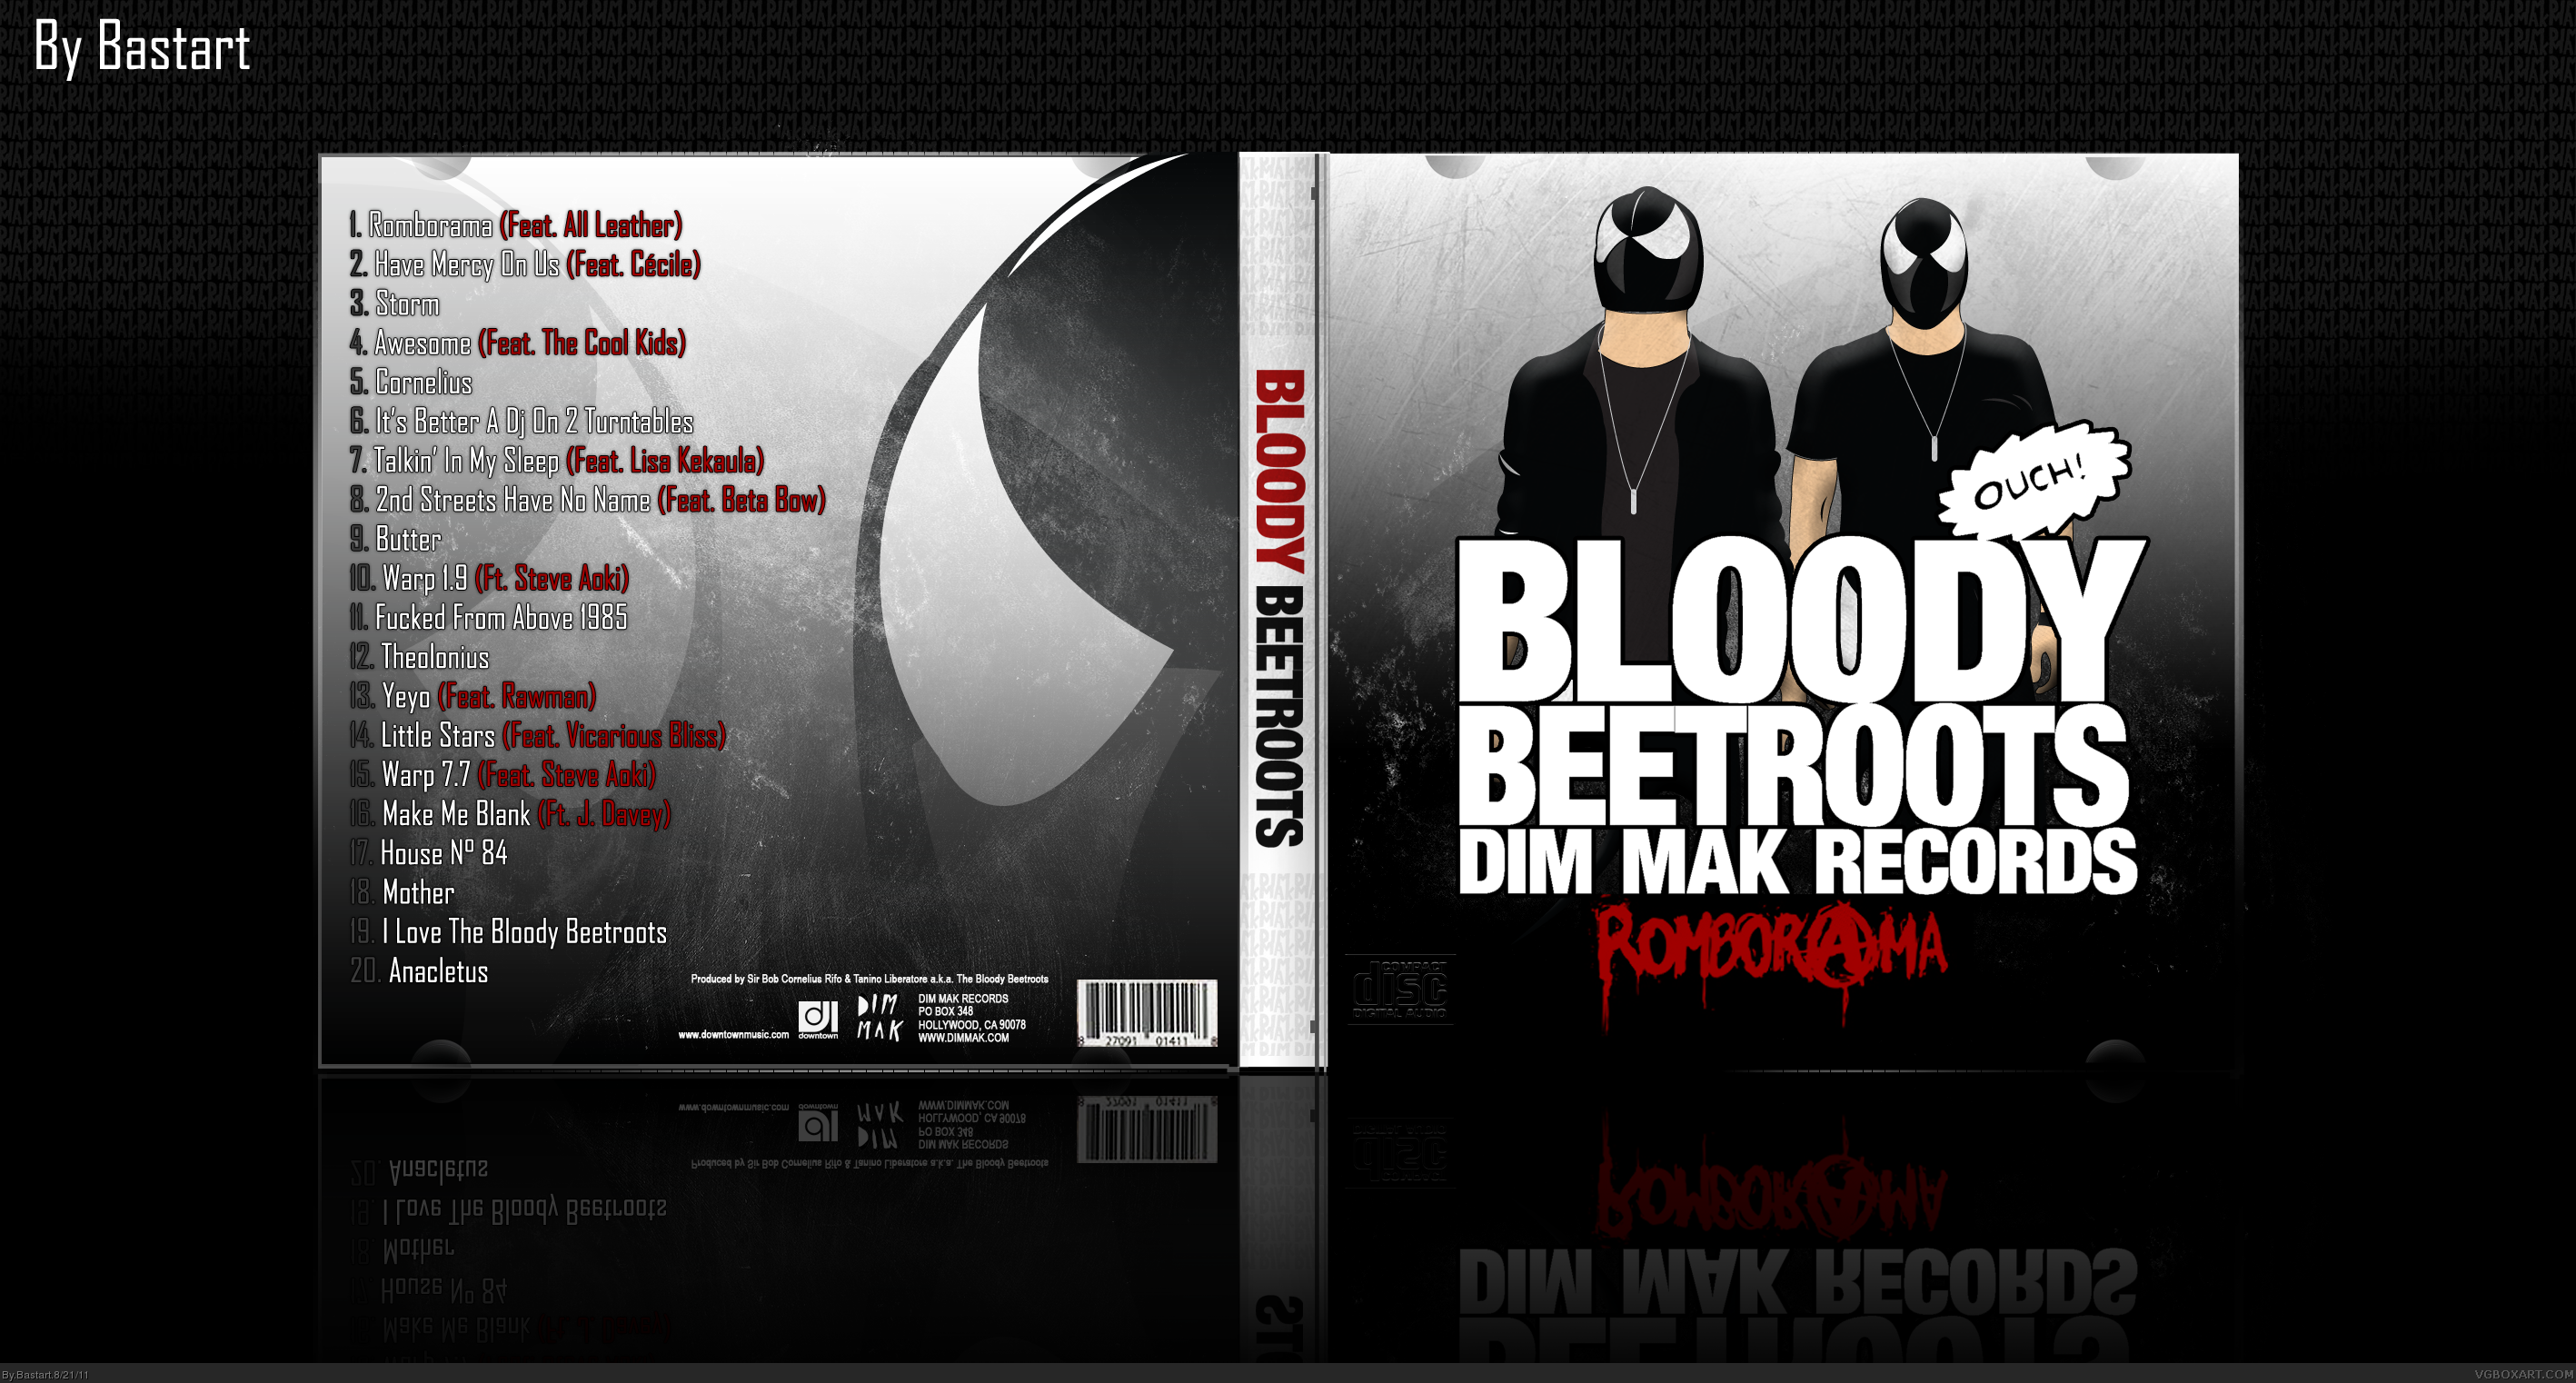 The Bloody Beetroots: Romborama box cover